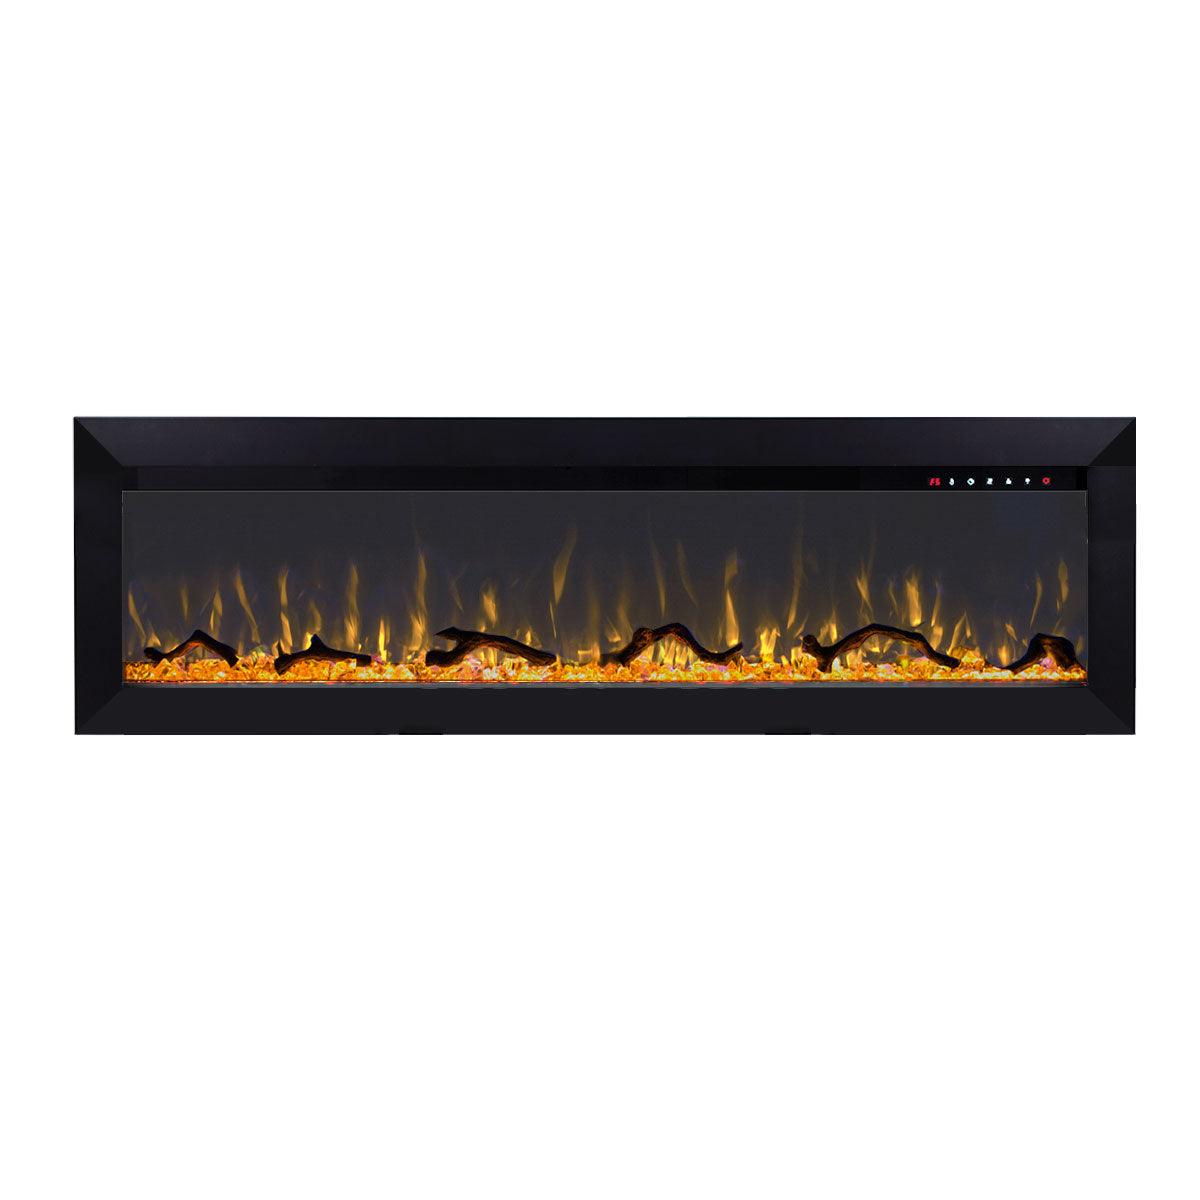 Herman 1500W 60 inch Built-in Recessed Electric Fireplace